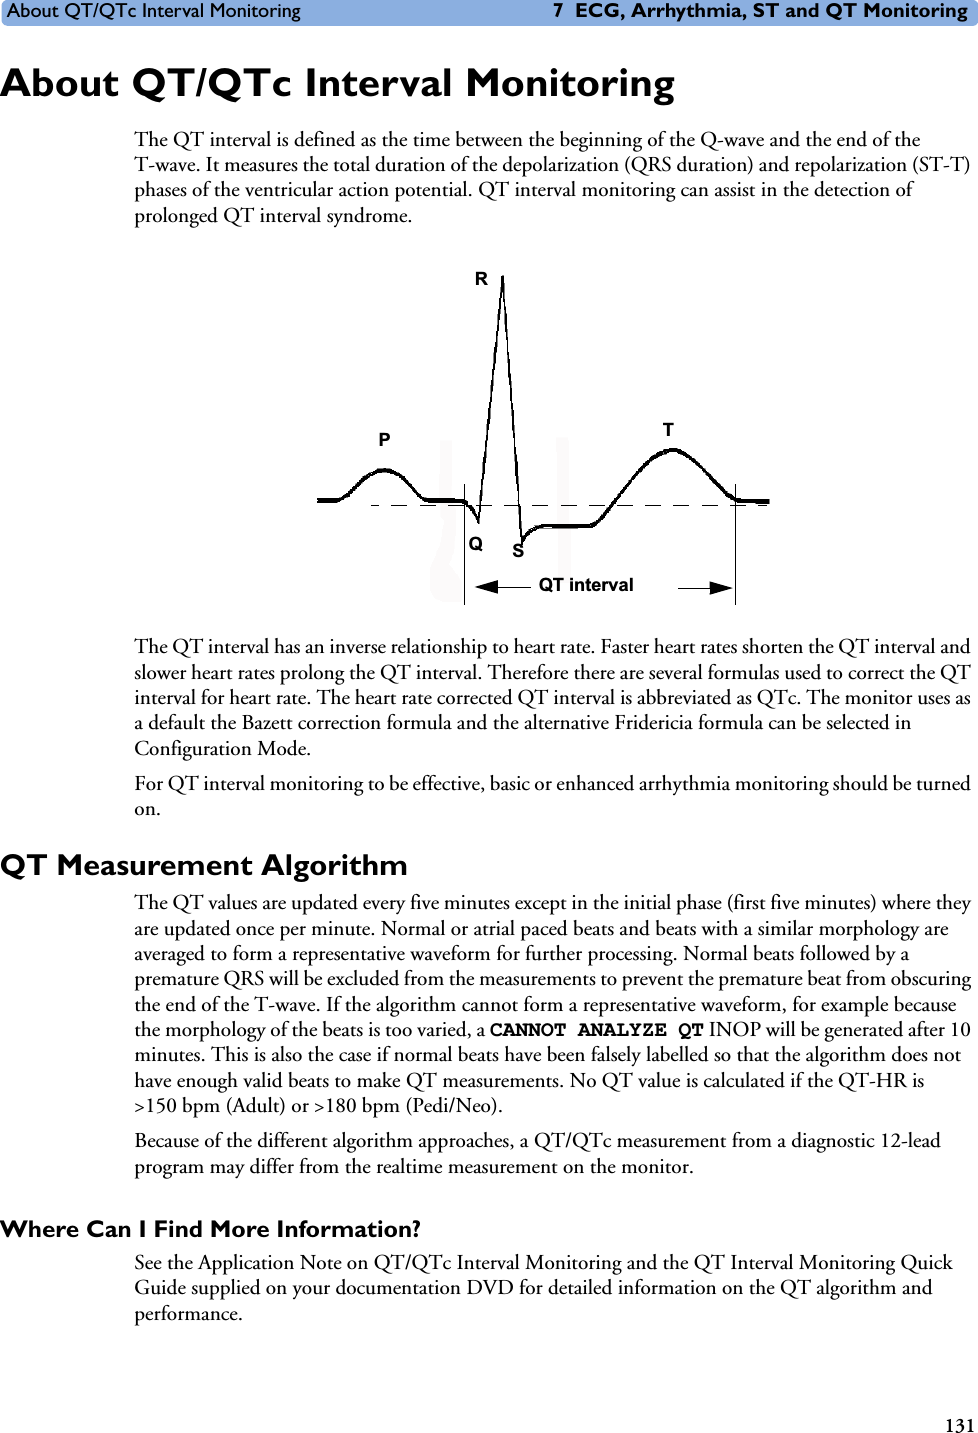 About QT/QTc Interval Monitoring 7 ECG, Arrhythmia, ST and QT Monitoring131About QT/QTc Interval MonitoringThe QT interval is defined as the time between the beginning of the Q-wave and the end of the T-wave. It measures the total duration of the depolarization (QRS duration) and repolarization (ST-T) phases of the ventricular action potential. QT interval monitoring can assist in the detection of prolonged QT interval syndrome. The QT interval has an inverse relationship to heart rate. Faster heart rates shorten the QT interval and slower heart rates prolong the QT interval. Therefore there are several formulas used to correct the QT interval for heart rate. The heart rate corrected QT interval is abbreviated as QTc. The monitor uses as a default the Bazett correction formula and the alternative Fridericia formula can be selected in Configuration Mode. For QT interval monitoring to be effective, basic or enhanced arrhythmia monitoring should be turned on. QT Measurement AlgorithmThe QT values are updated every five minutes except in the initial phase (first five minutes) where they are updated once per minute. Normal or atrial paced beats and beats with a similar morphology are averaged to form a representative waveform for further processing. Normal beats followed by a premature QRS will be excluded from the measurements to prevent the premature beat from obscuring the end of the T-wave. If the algorithm cannot form a representative waveform, for example because the morphology of the beats is too varied, a CANNOT ANALYZE QT INOP will be generated after 10 minutes. This is also the case if normal beats have been falsely labelled so that the algorithm does not have enough valid beats to make QT measurements. No QT value is calculated if the QT-HR is &gt;150 bpm (Adult) or &gt;180 bpm (Pedi/Neo).Because of the different algorithm approaches, a QT/QTc measurement from a diagnostic 12-lead program may differ from the realtime measurement on the monitor. Where Can I Find More Information? See the Application Note on QT/QTc Interval Monitoring and the QT Interval Monitoring Quick Guide supplied on your documentation DVD for detailed information on the QT algorithm and performance.TQSPRQT interval